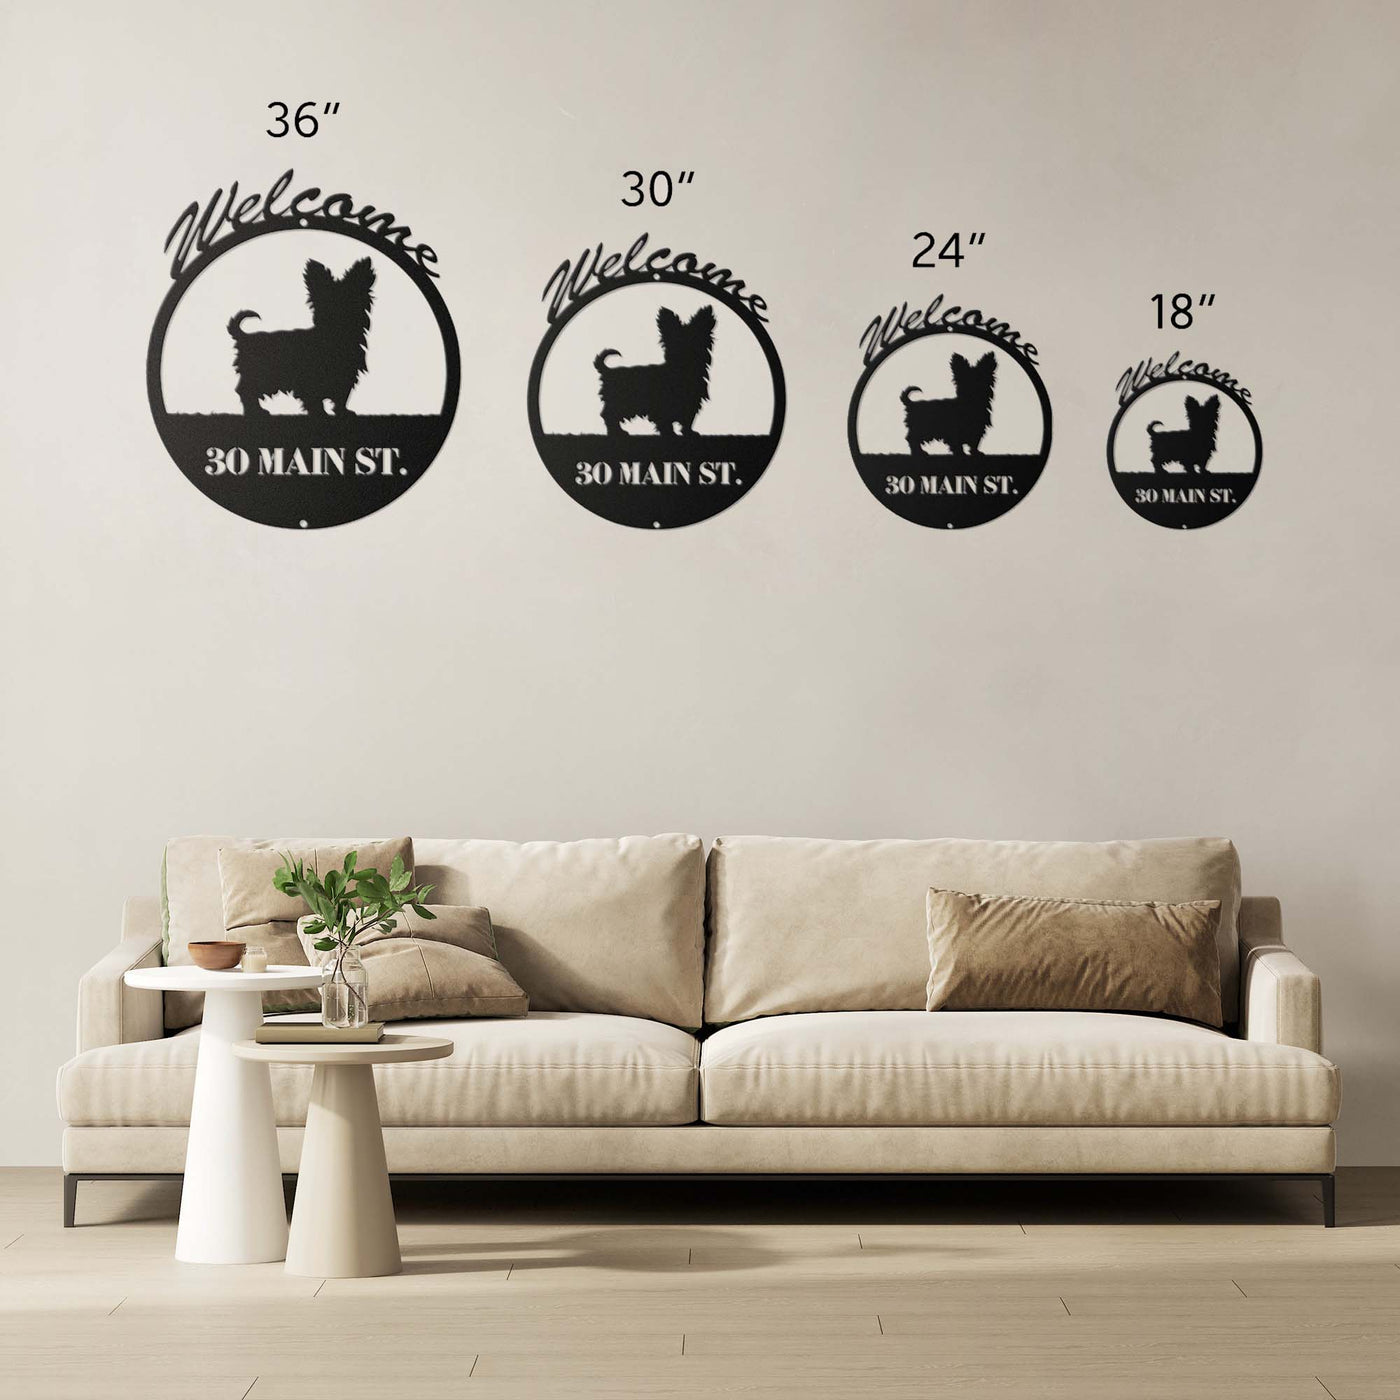 size comparison of dog themed circular metal signs with diameters of thirty six inches, thirty inches, twenty four inches, and eighteen inches